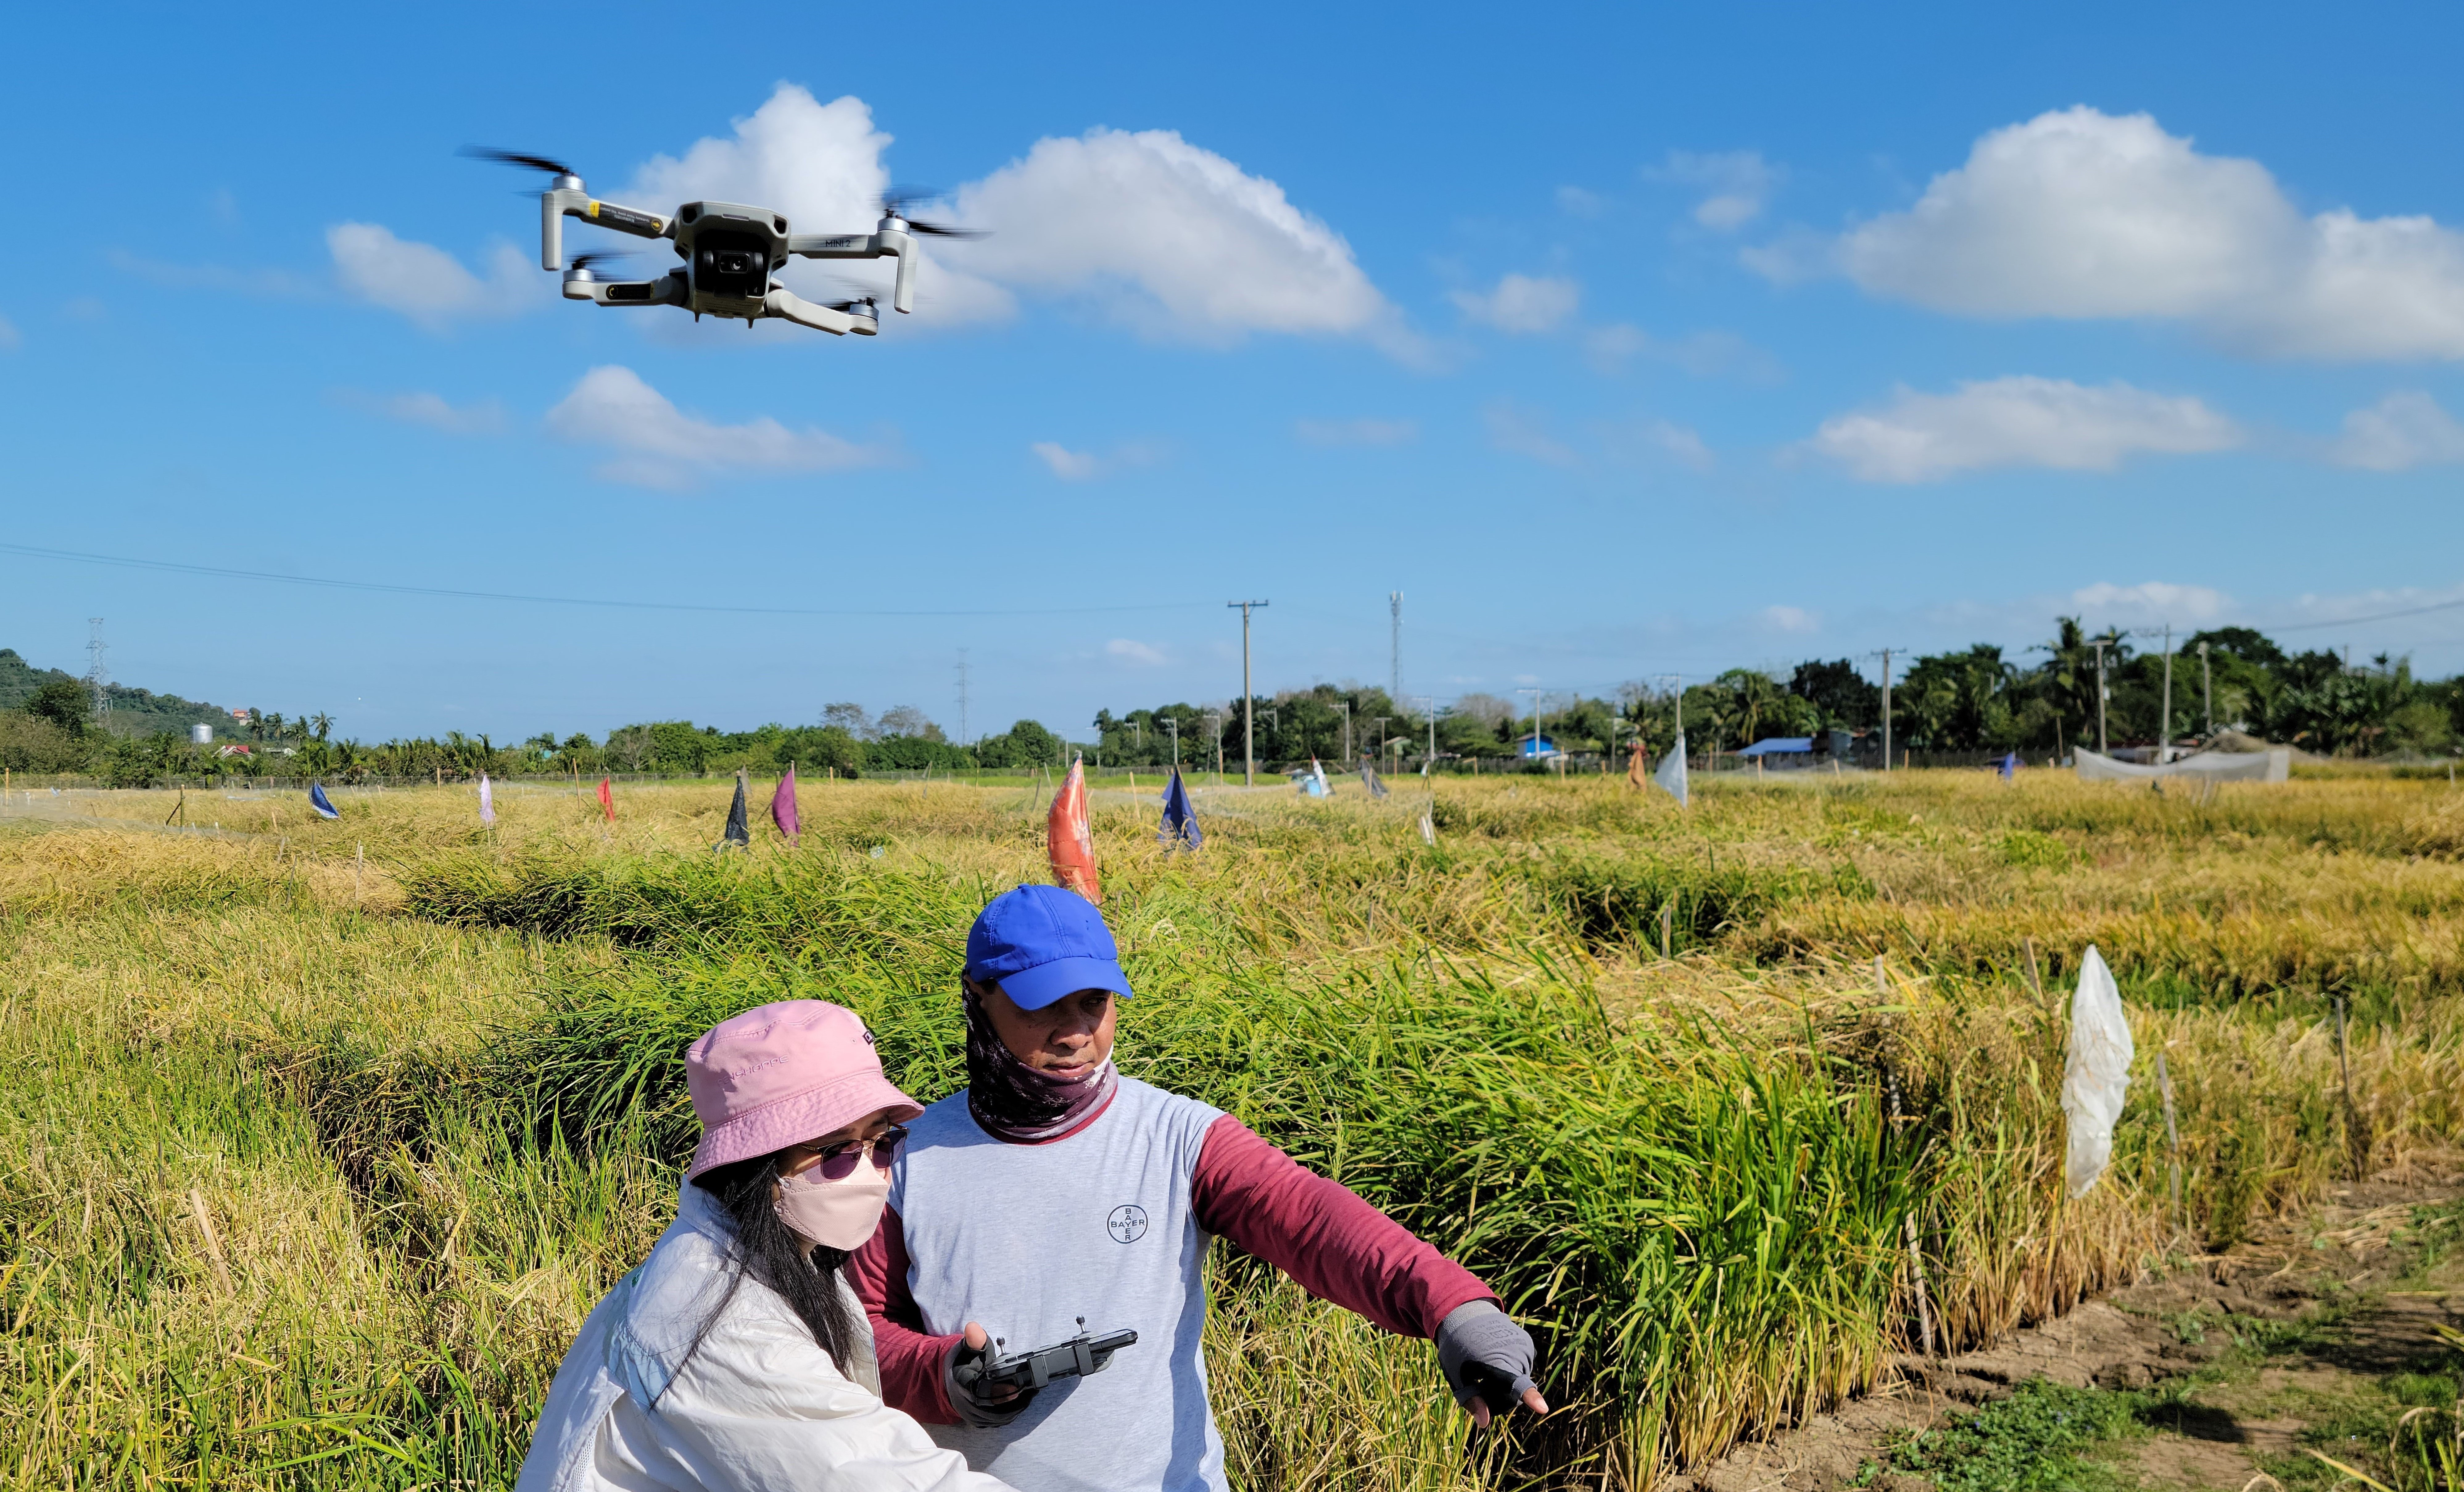 The first photo depicts two people observing conditions in a rice field while a drone captures photos above them